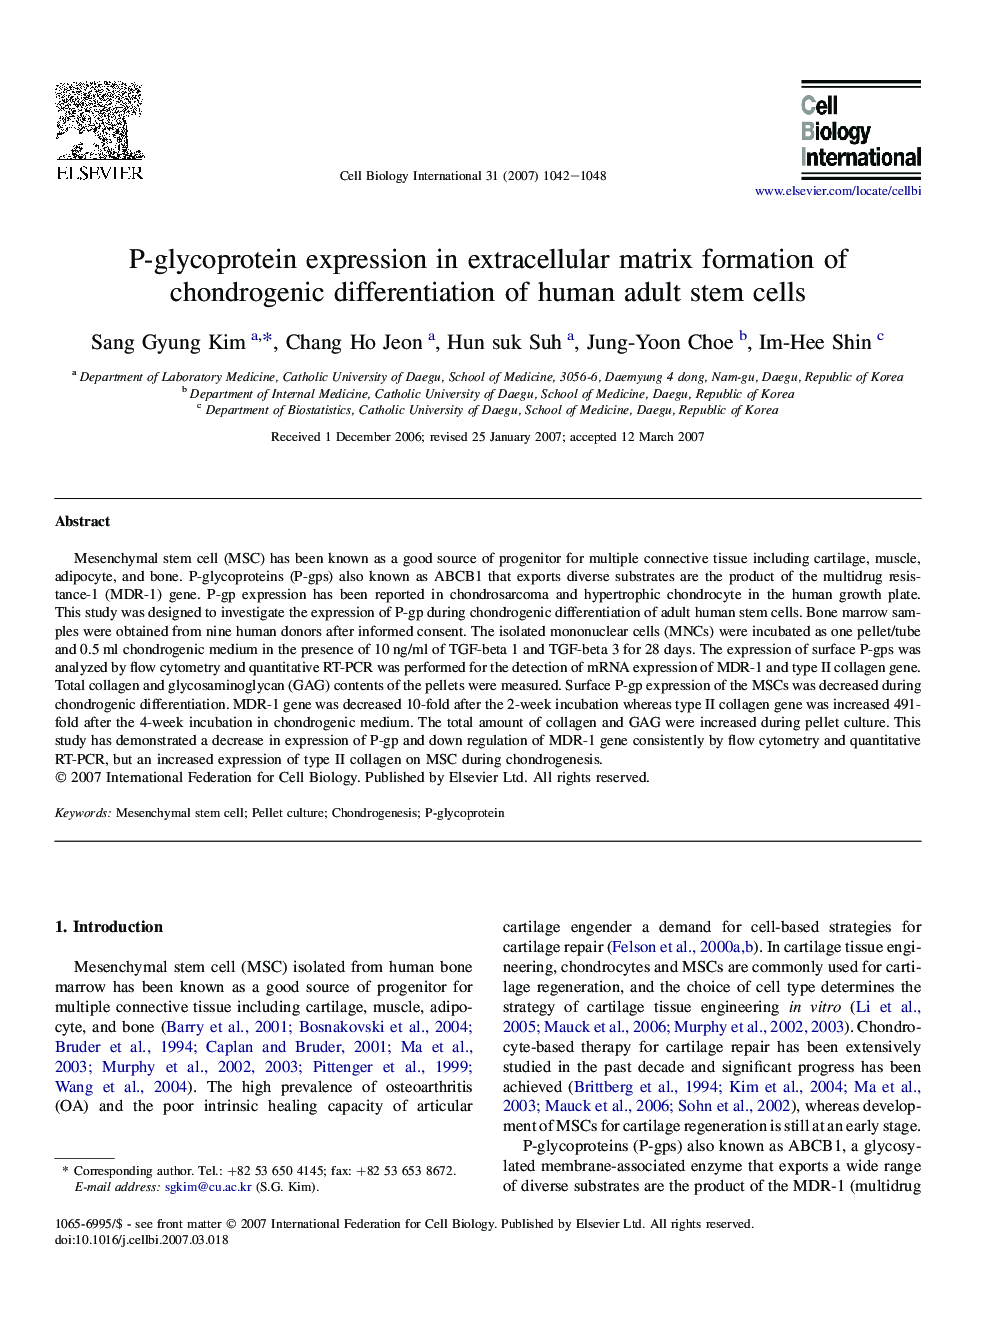 P-glycoprotein expression in extracellular matrix formation of chondrogenic differentiation of human adult stem cells